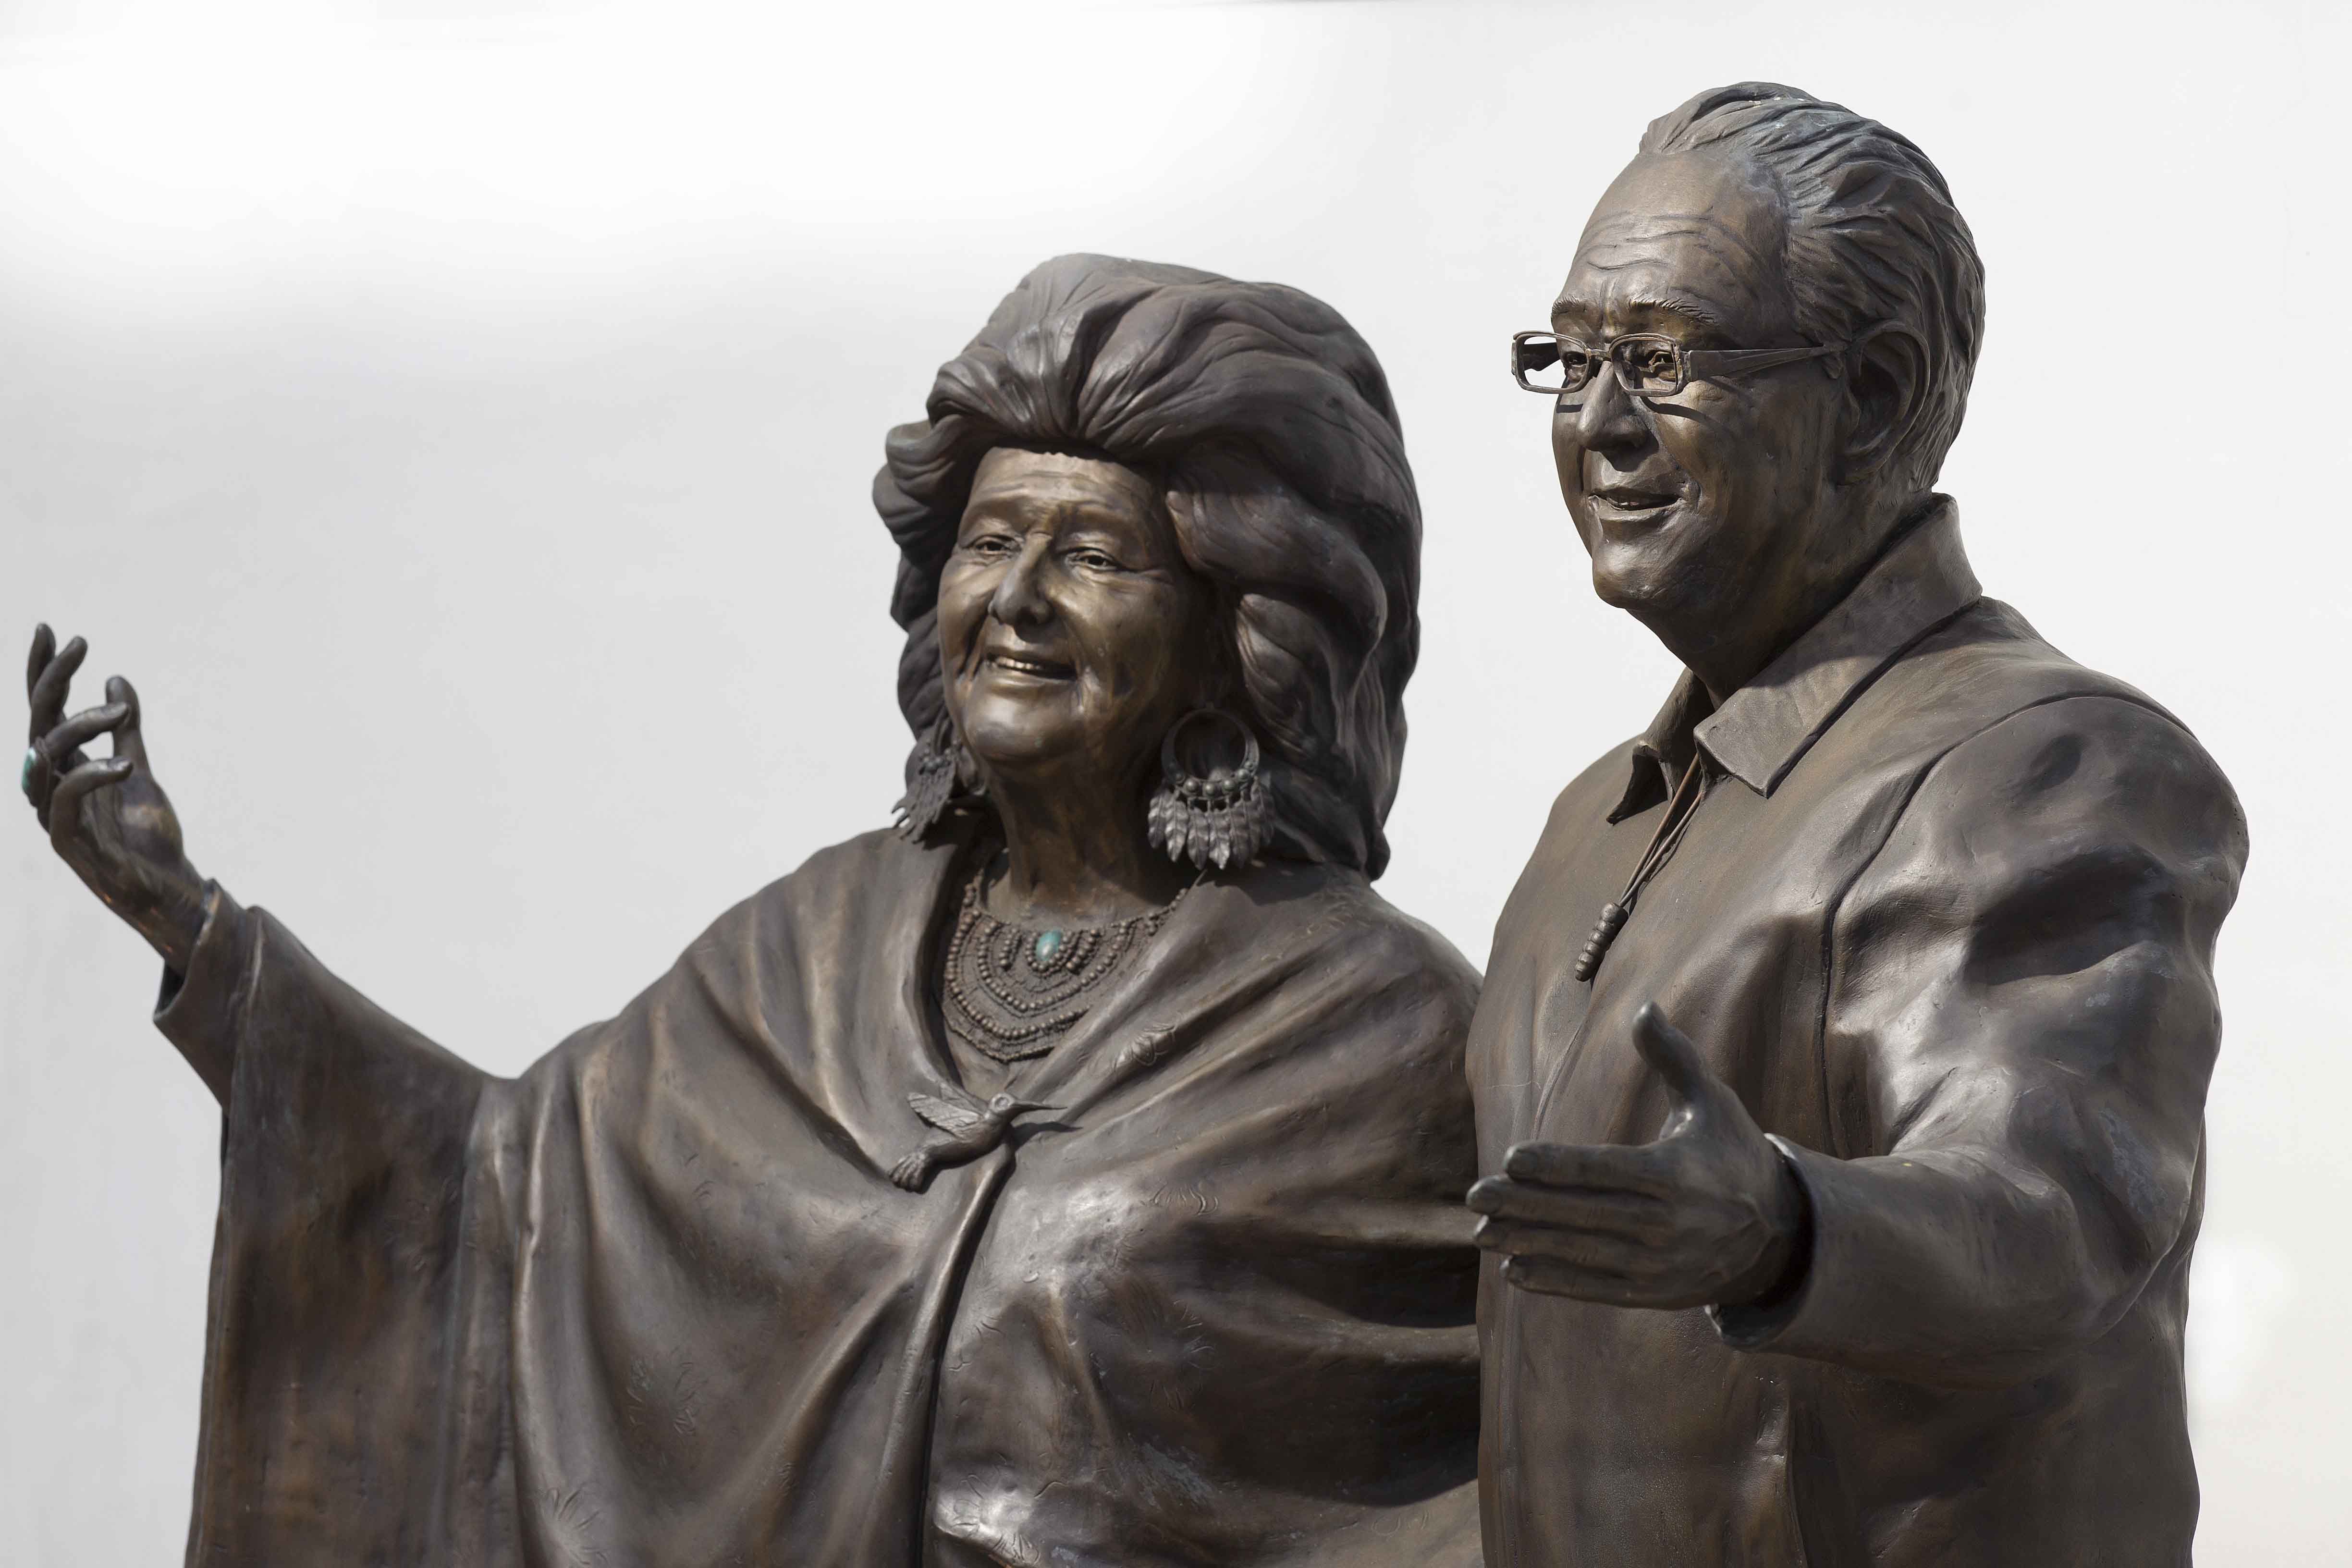 The statue of Pauline and George Murillo at the Murillo Family Observatory.